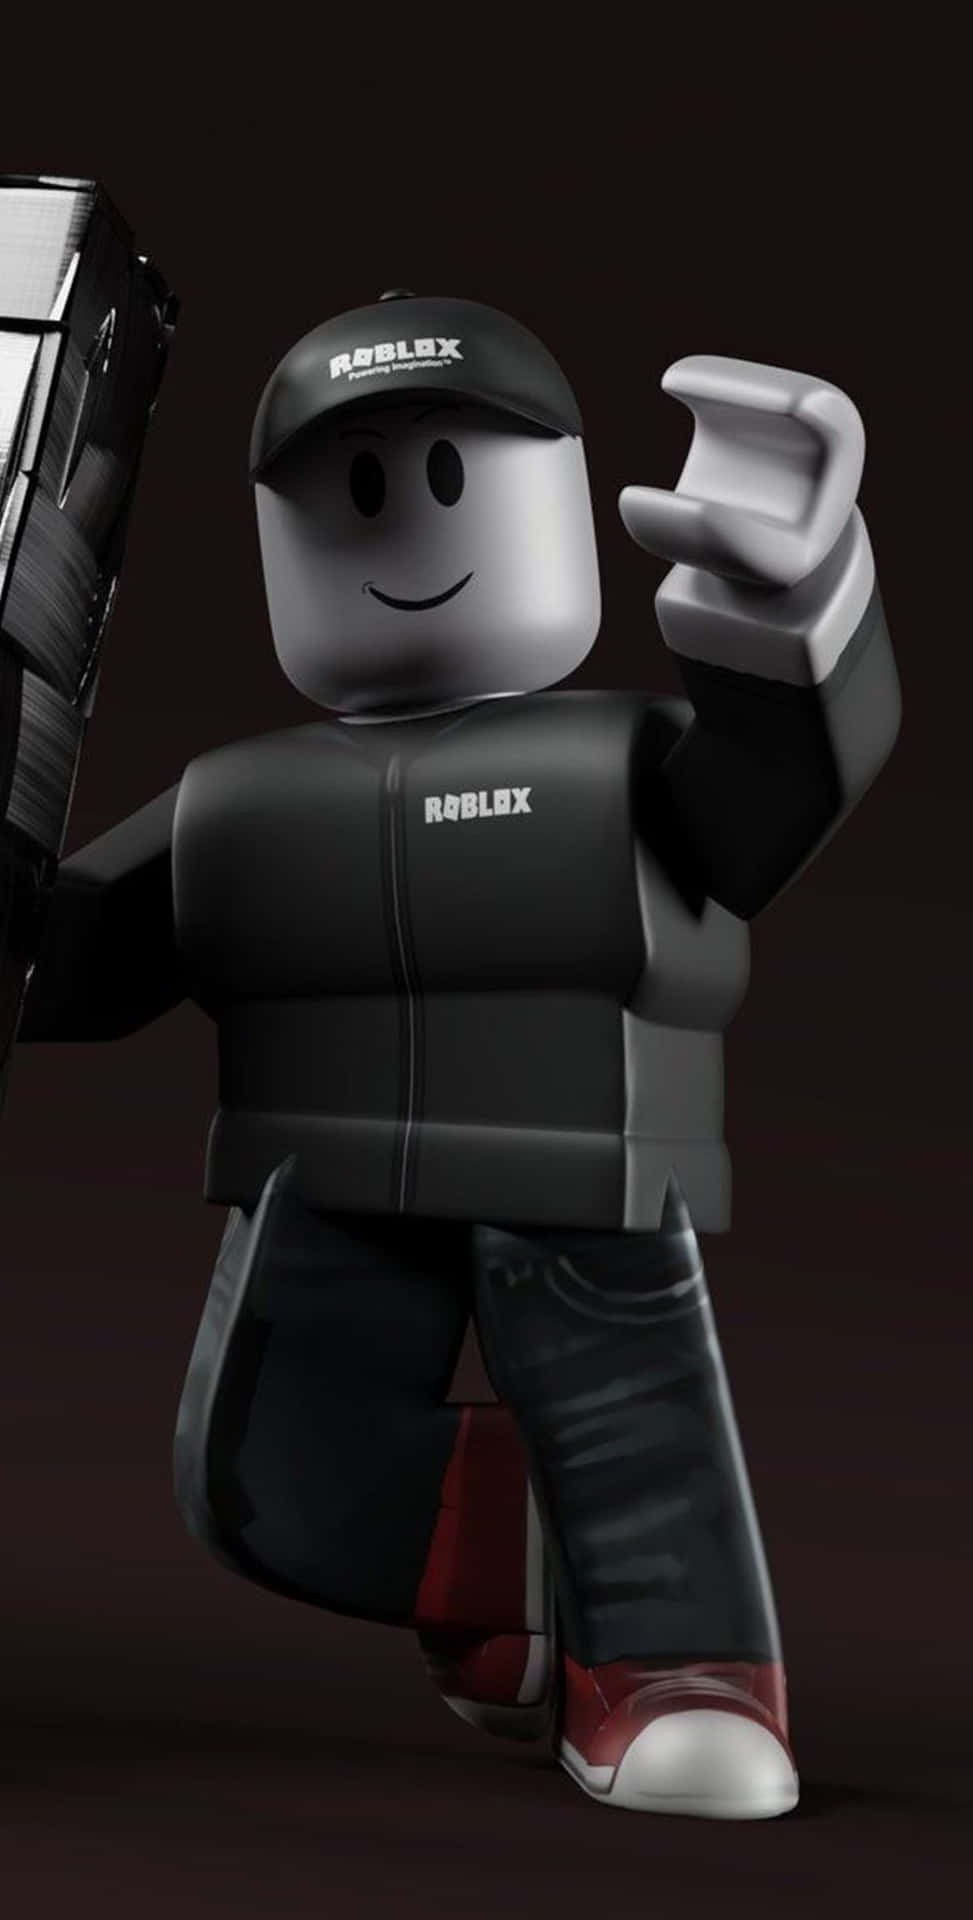 Sort Outfit Guy Roblox Iphone Tapet Wallpaper